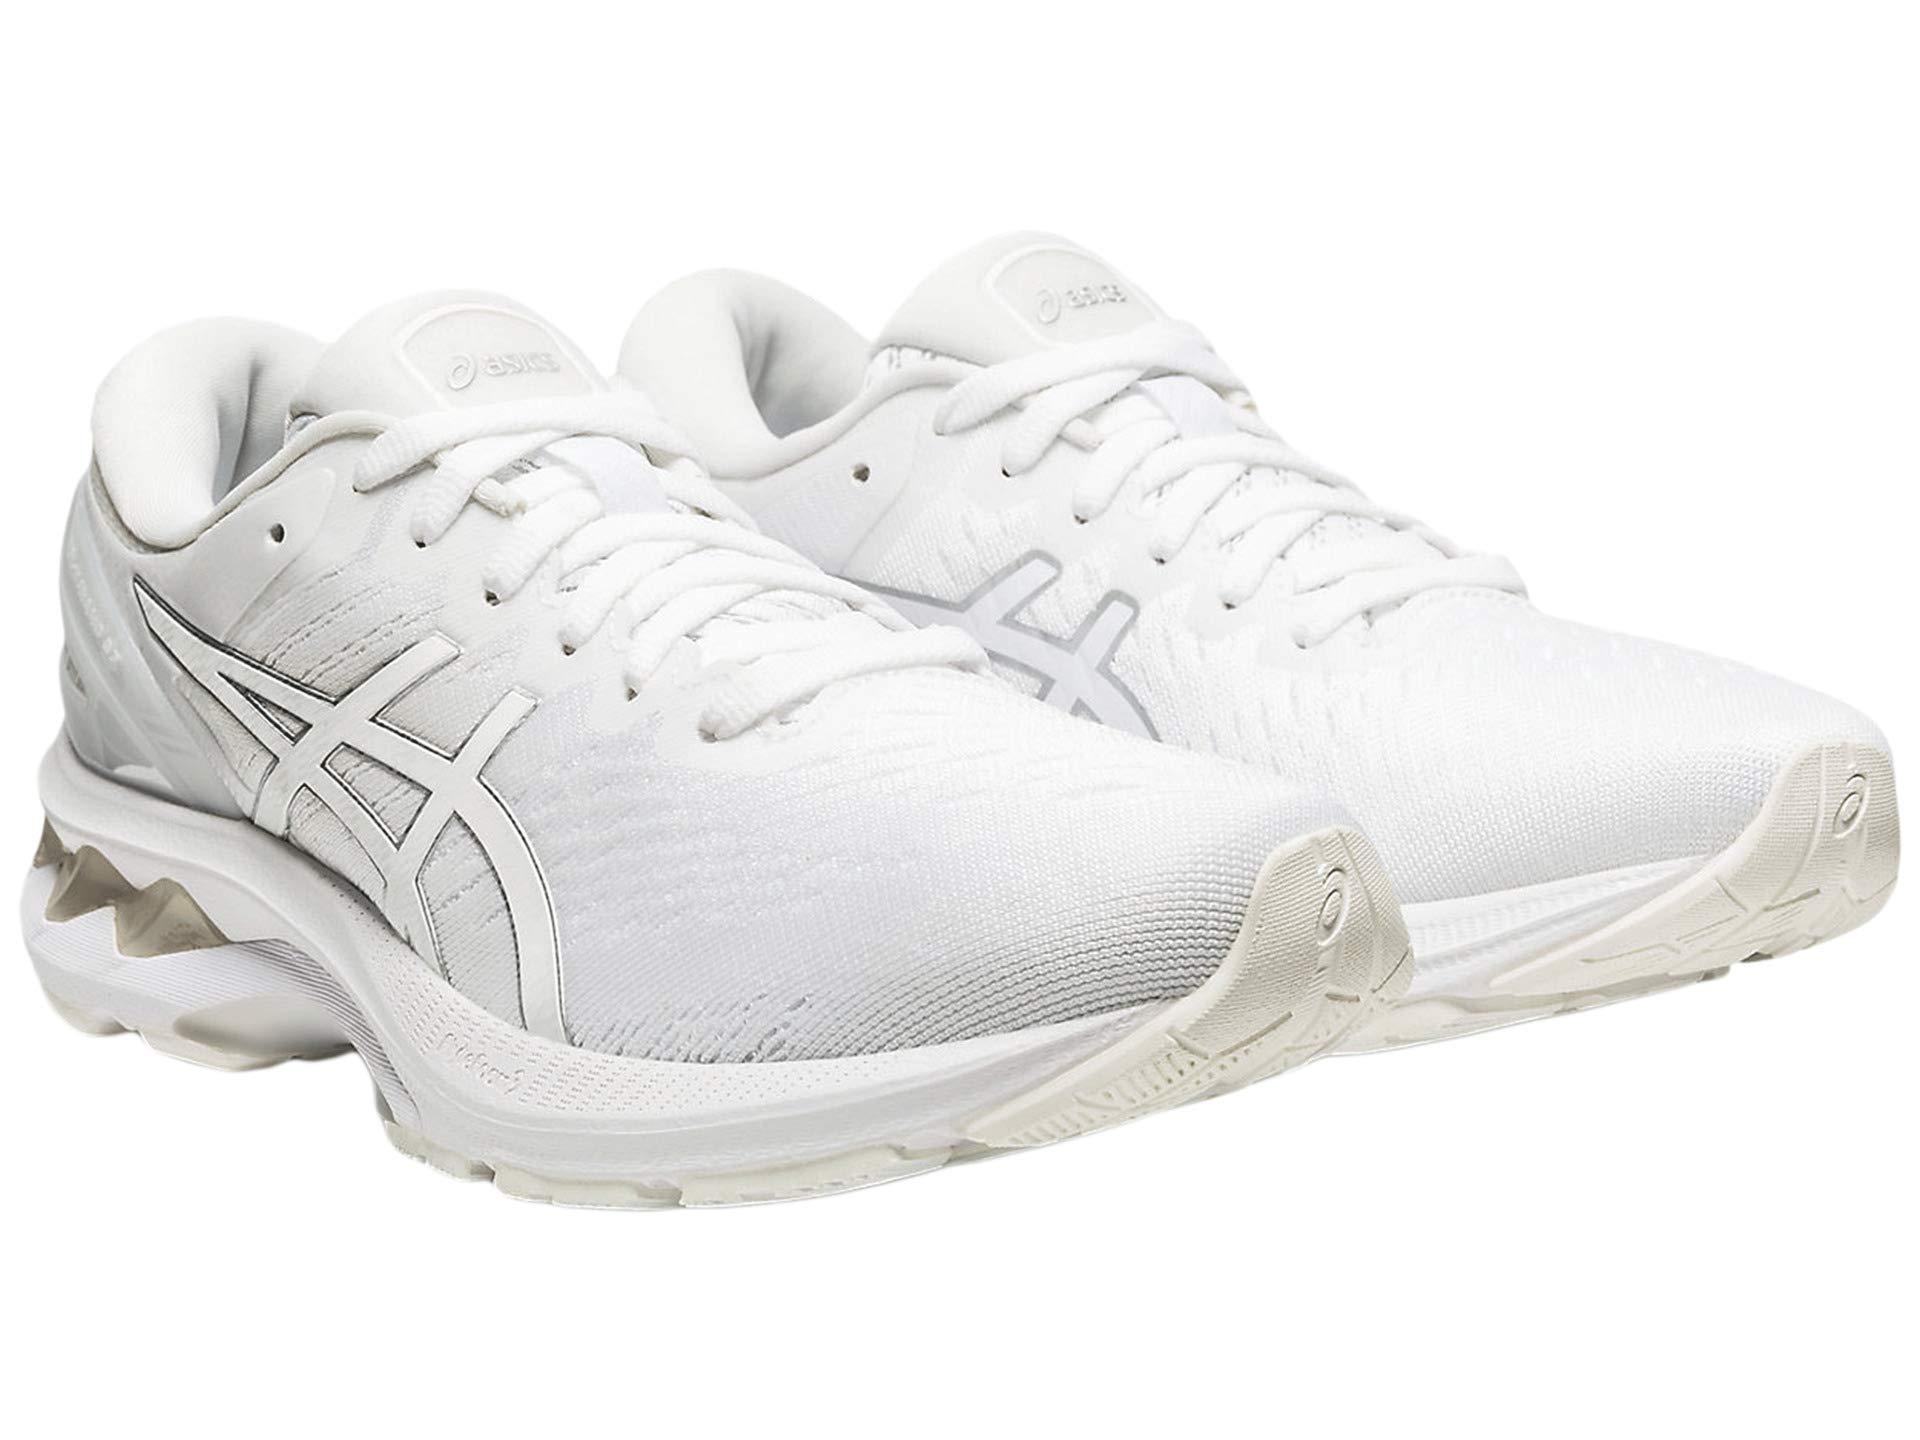 Asics Synthetic Gel-kayano in White/Silver (White) - Save 34% - Lyst